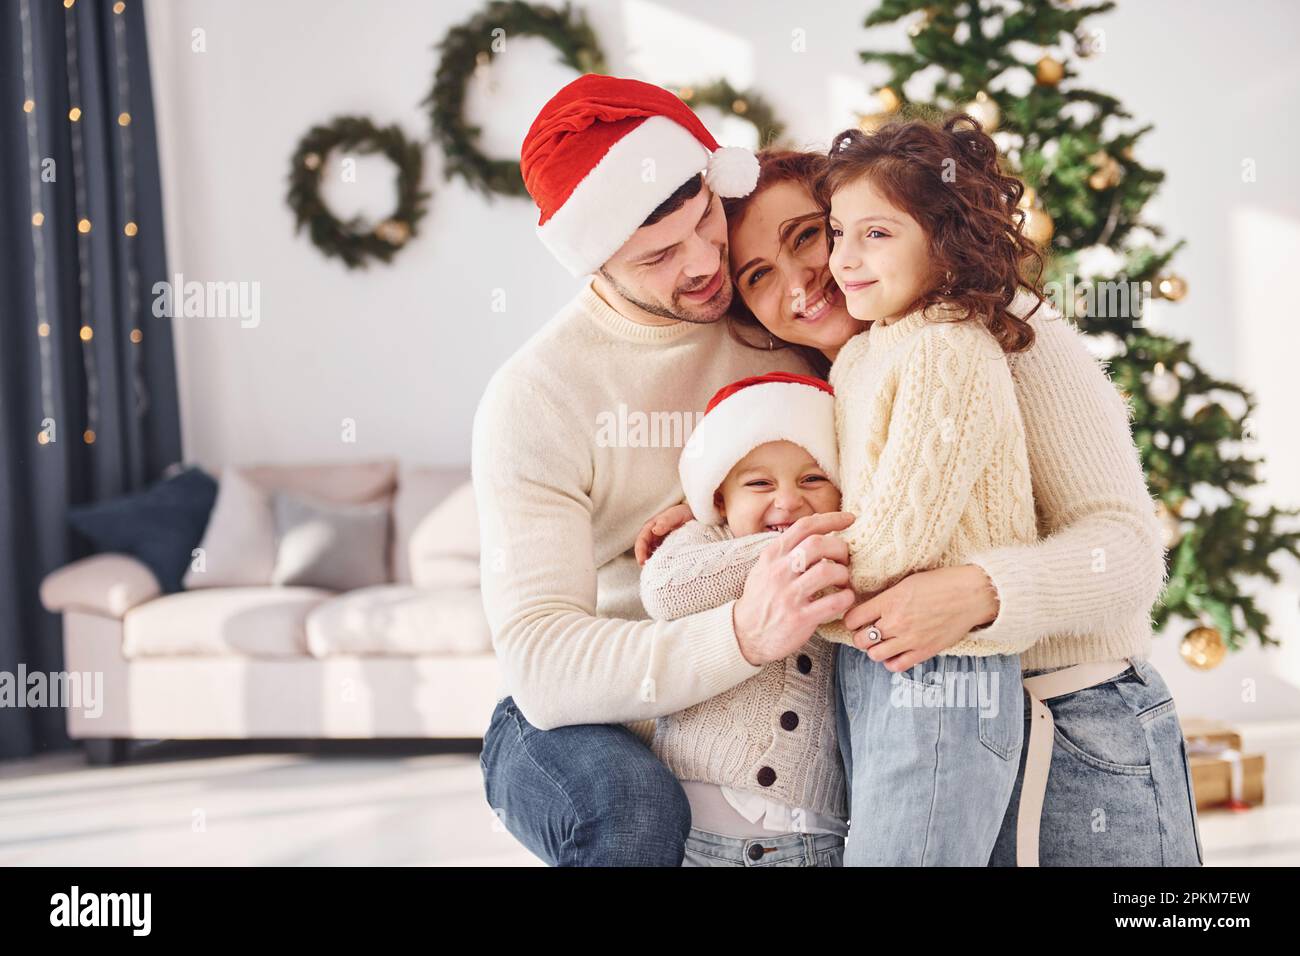 In christmas hats. Family celebrating new year with their children at home. Stock Photo